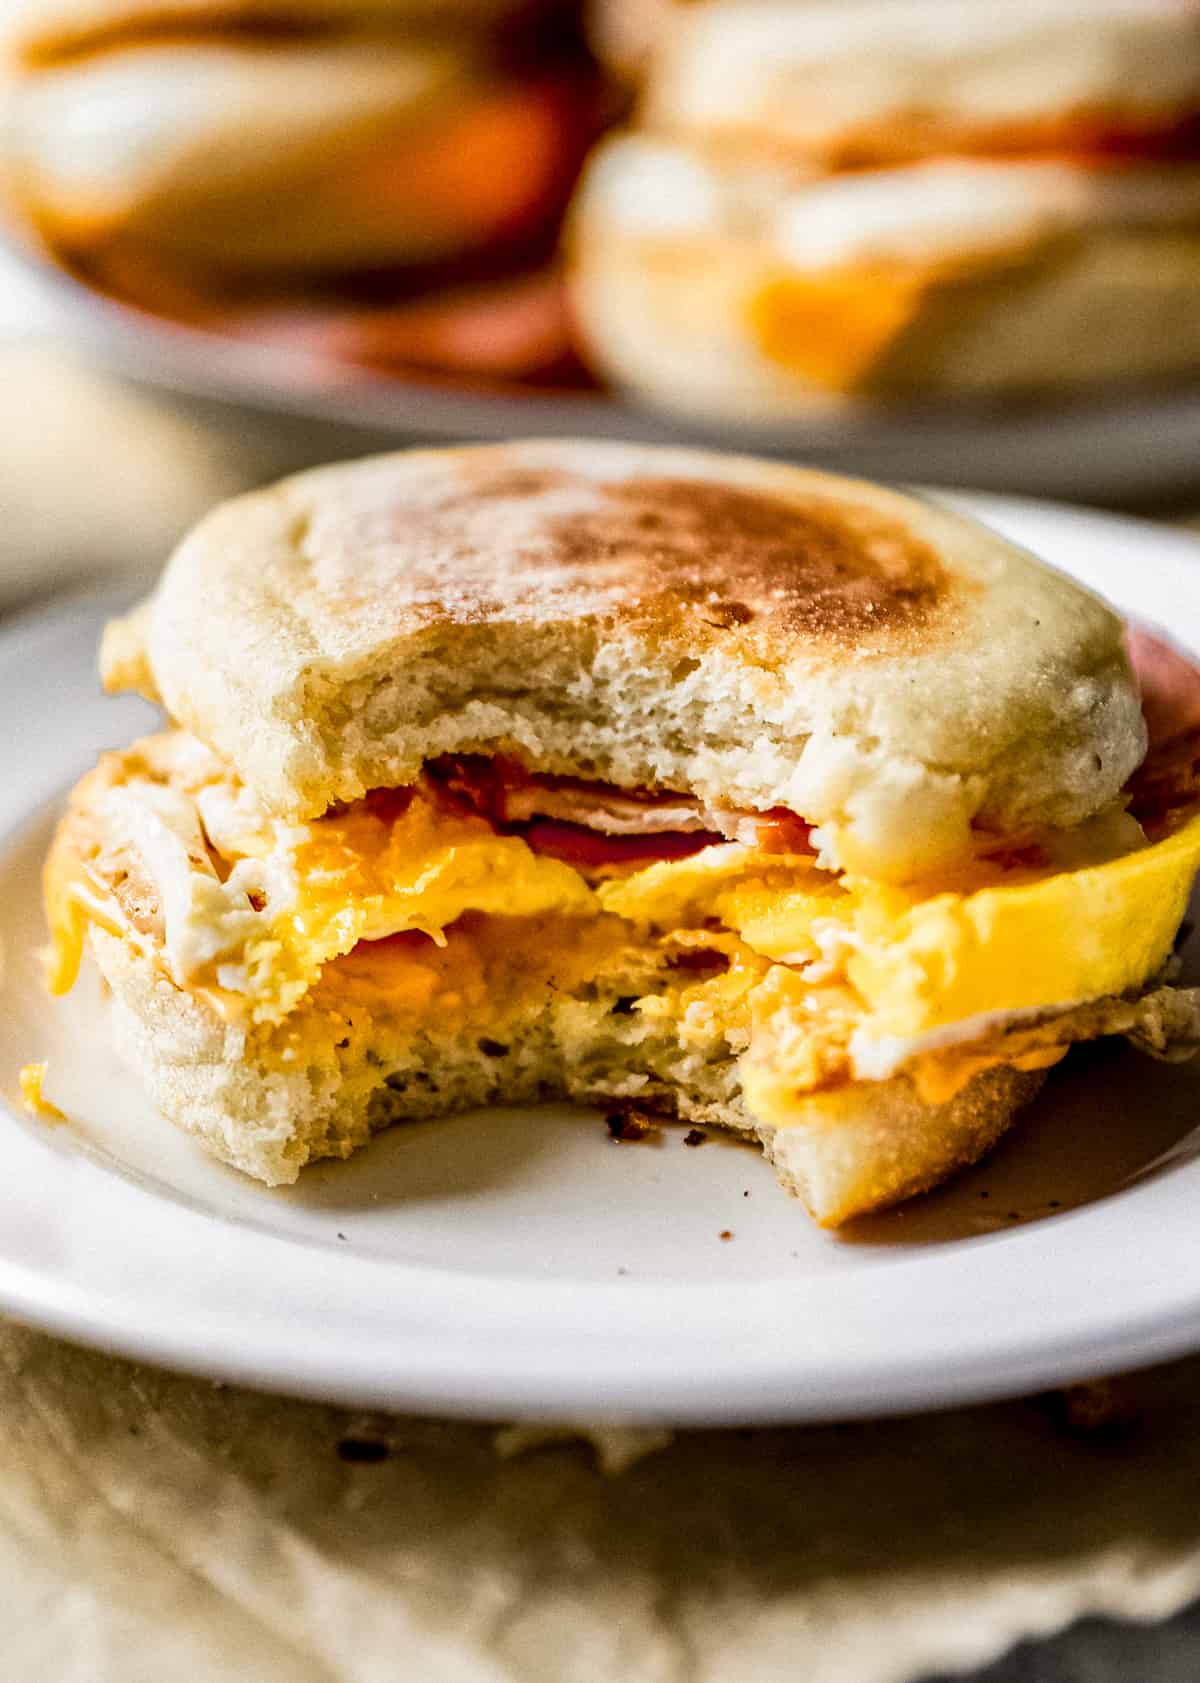 The Complete Guide to the 5-Minute Breakfast Sandwich